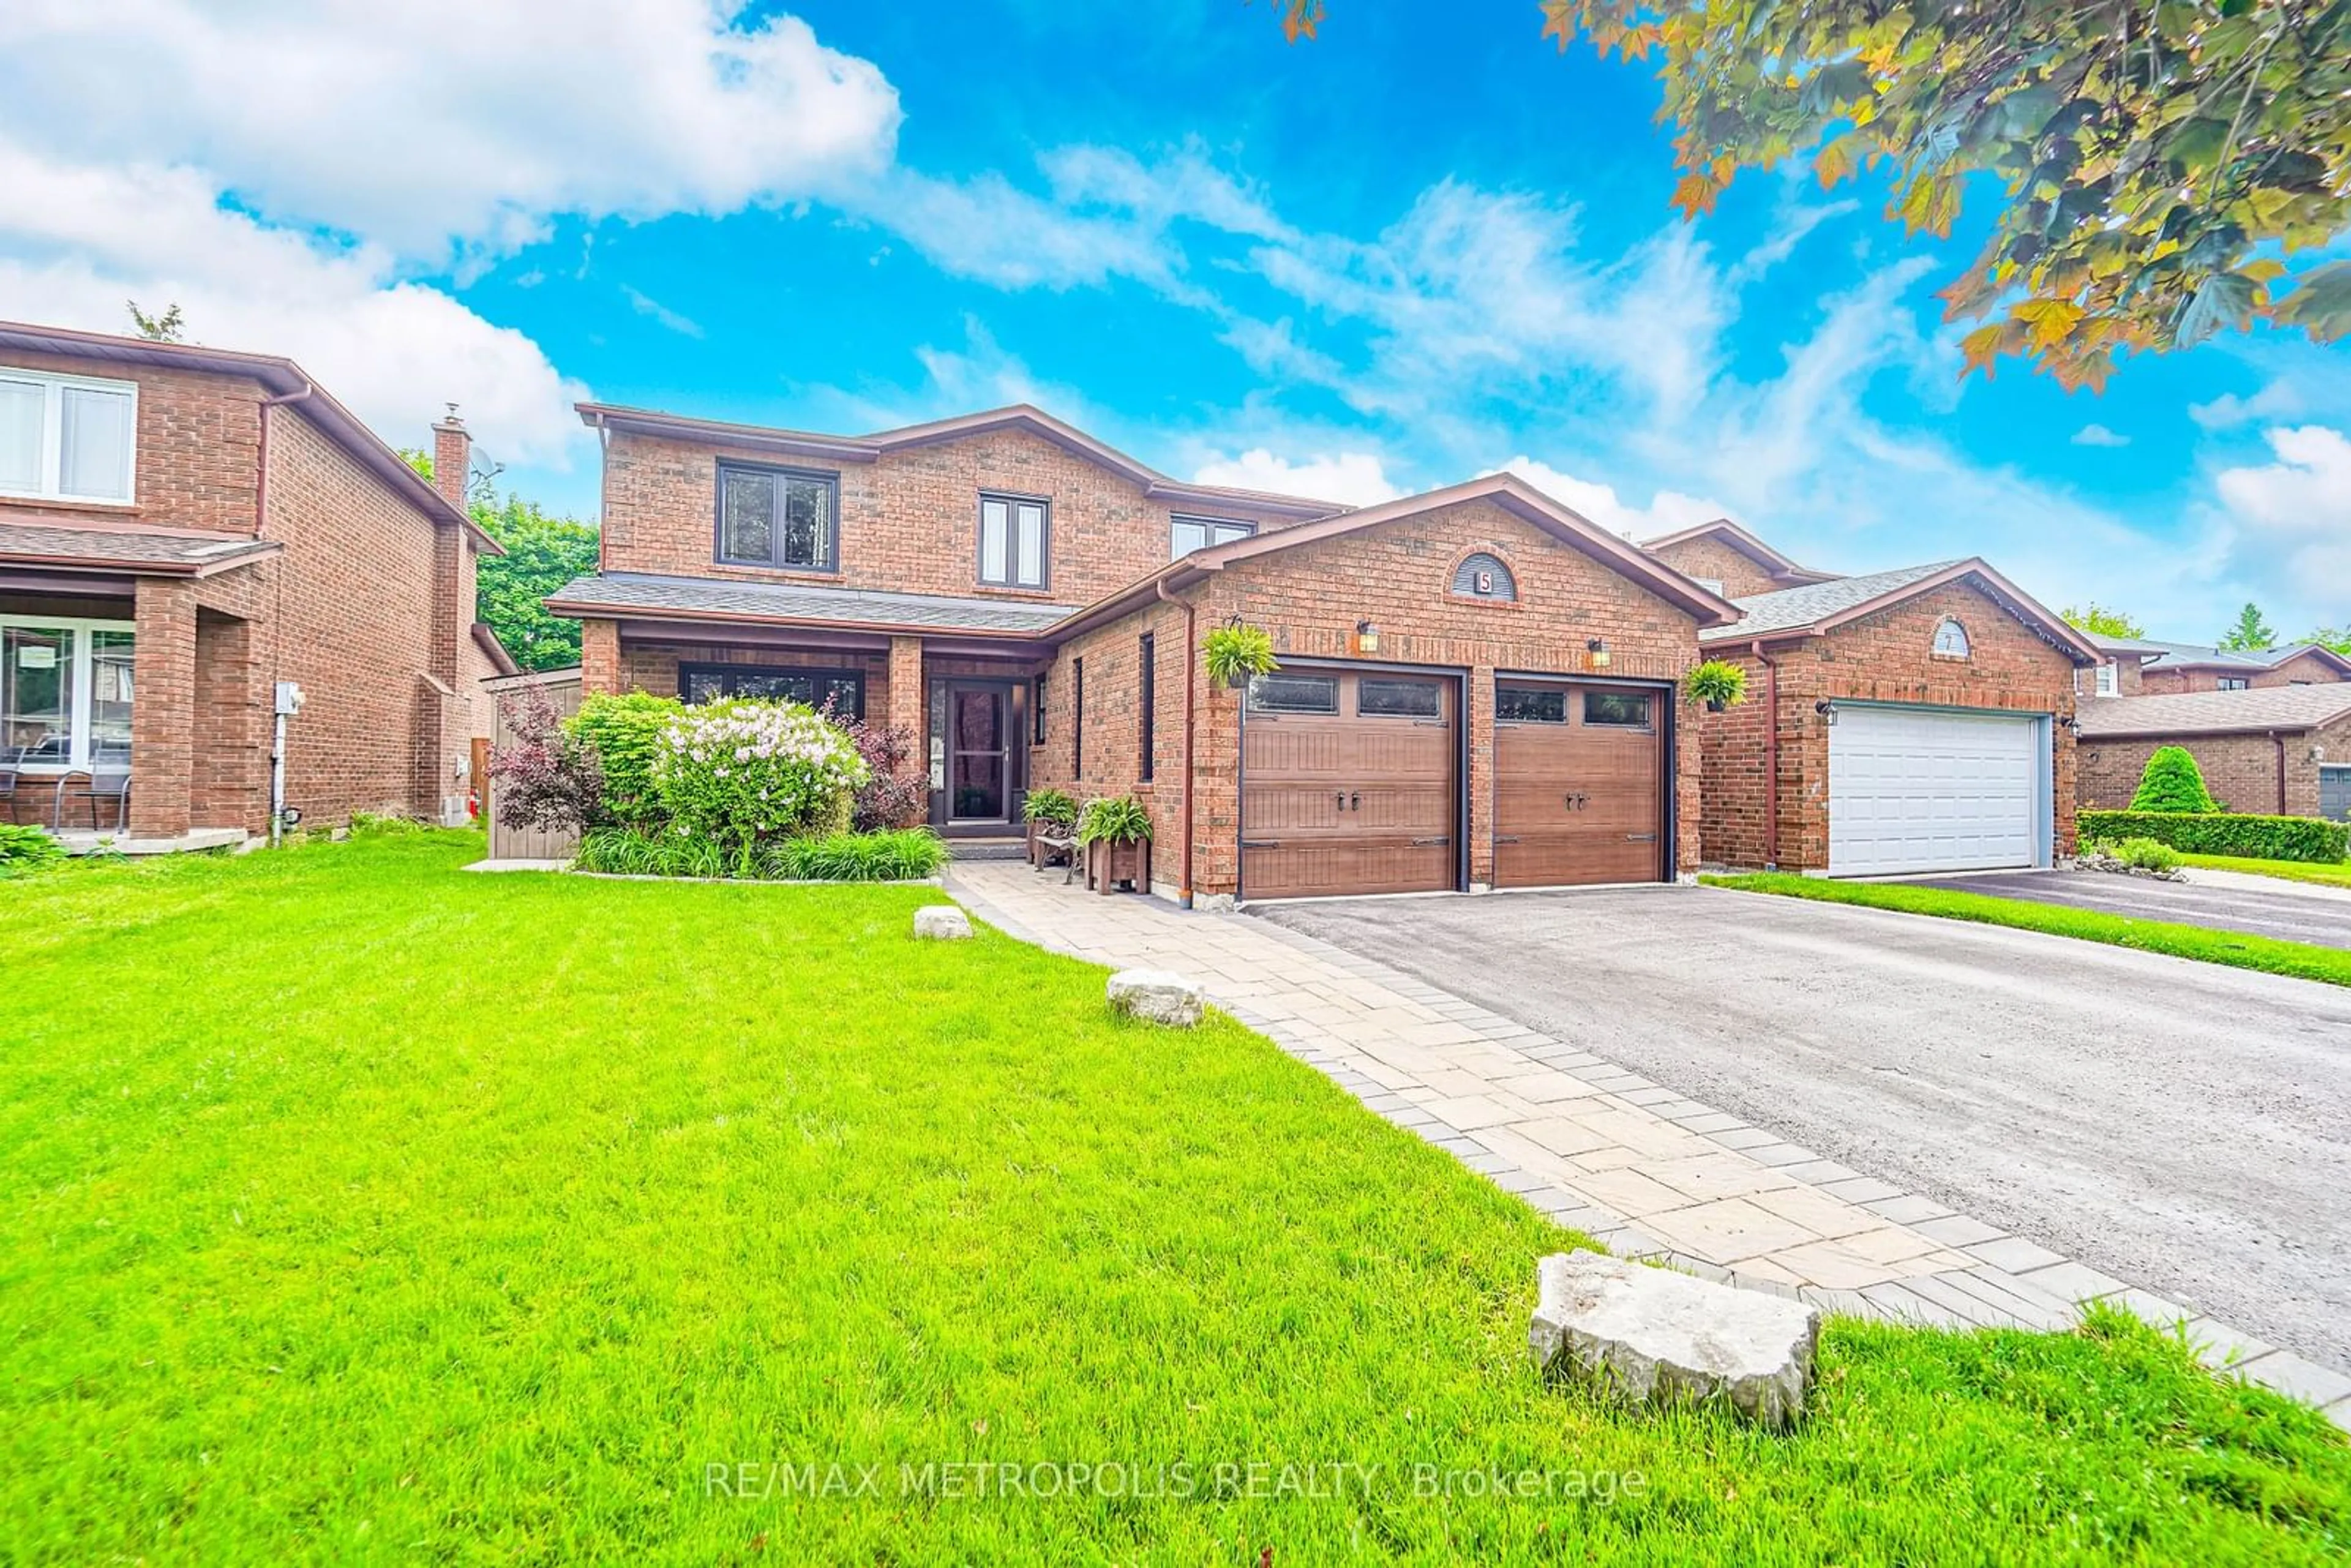 Home with brick exterior material for 5 Broughton Crt, Whitby Ontario L1N 6Y8